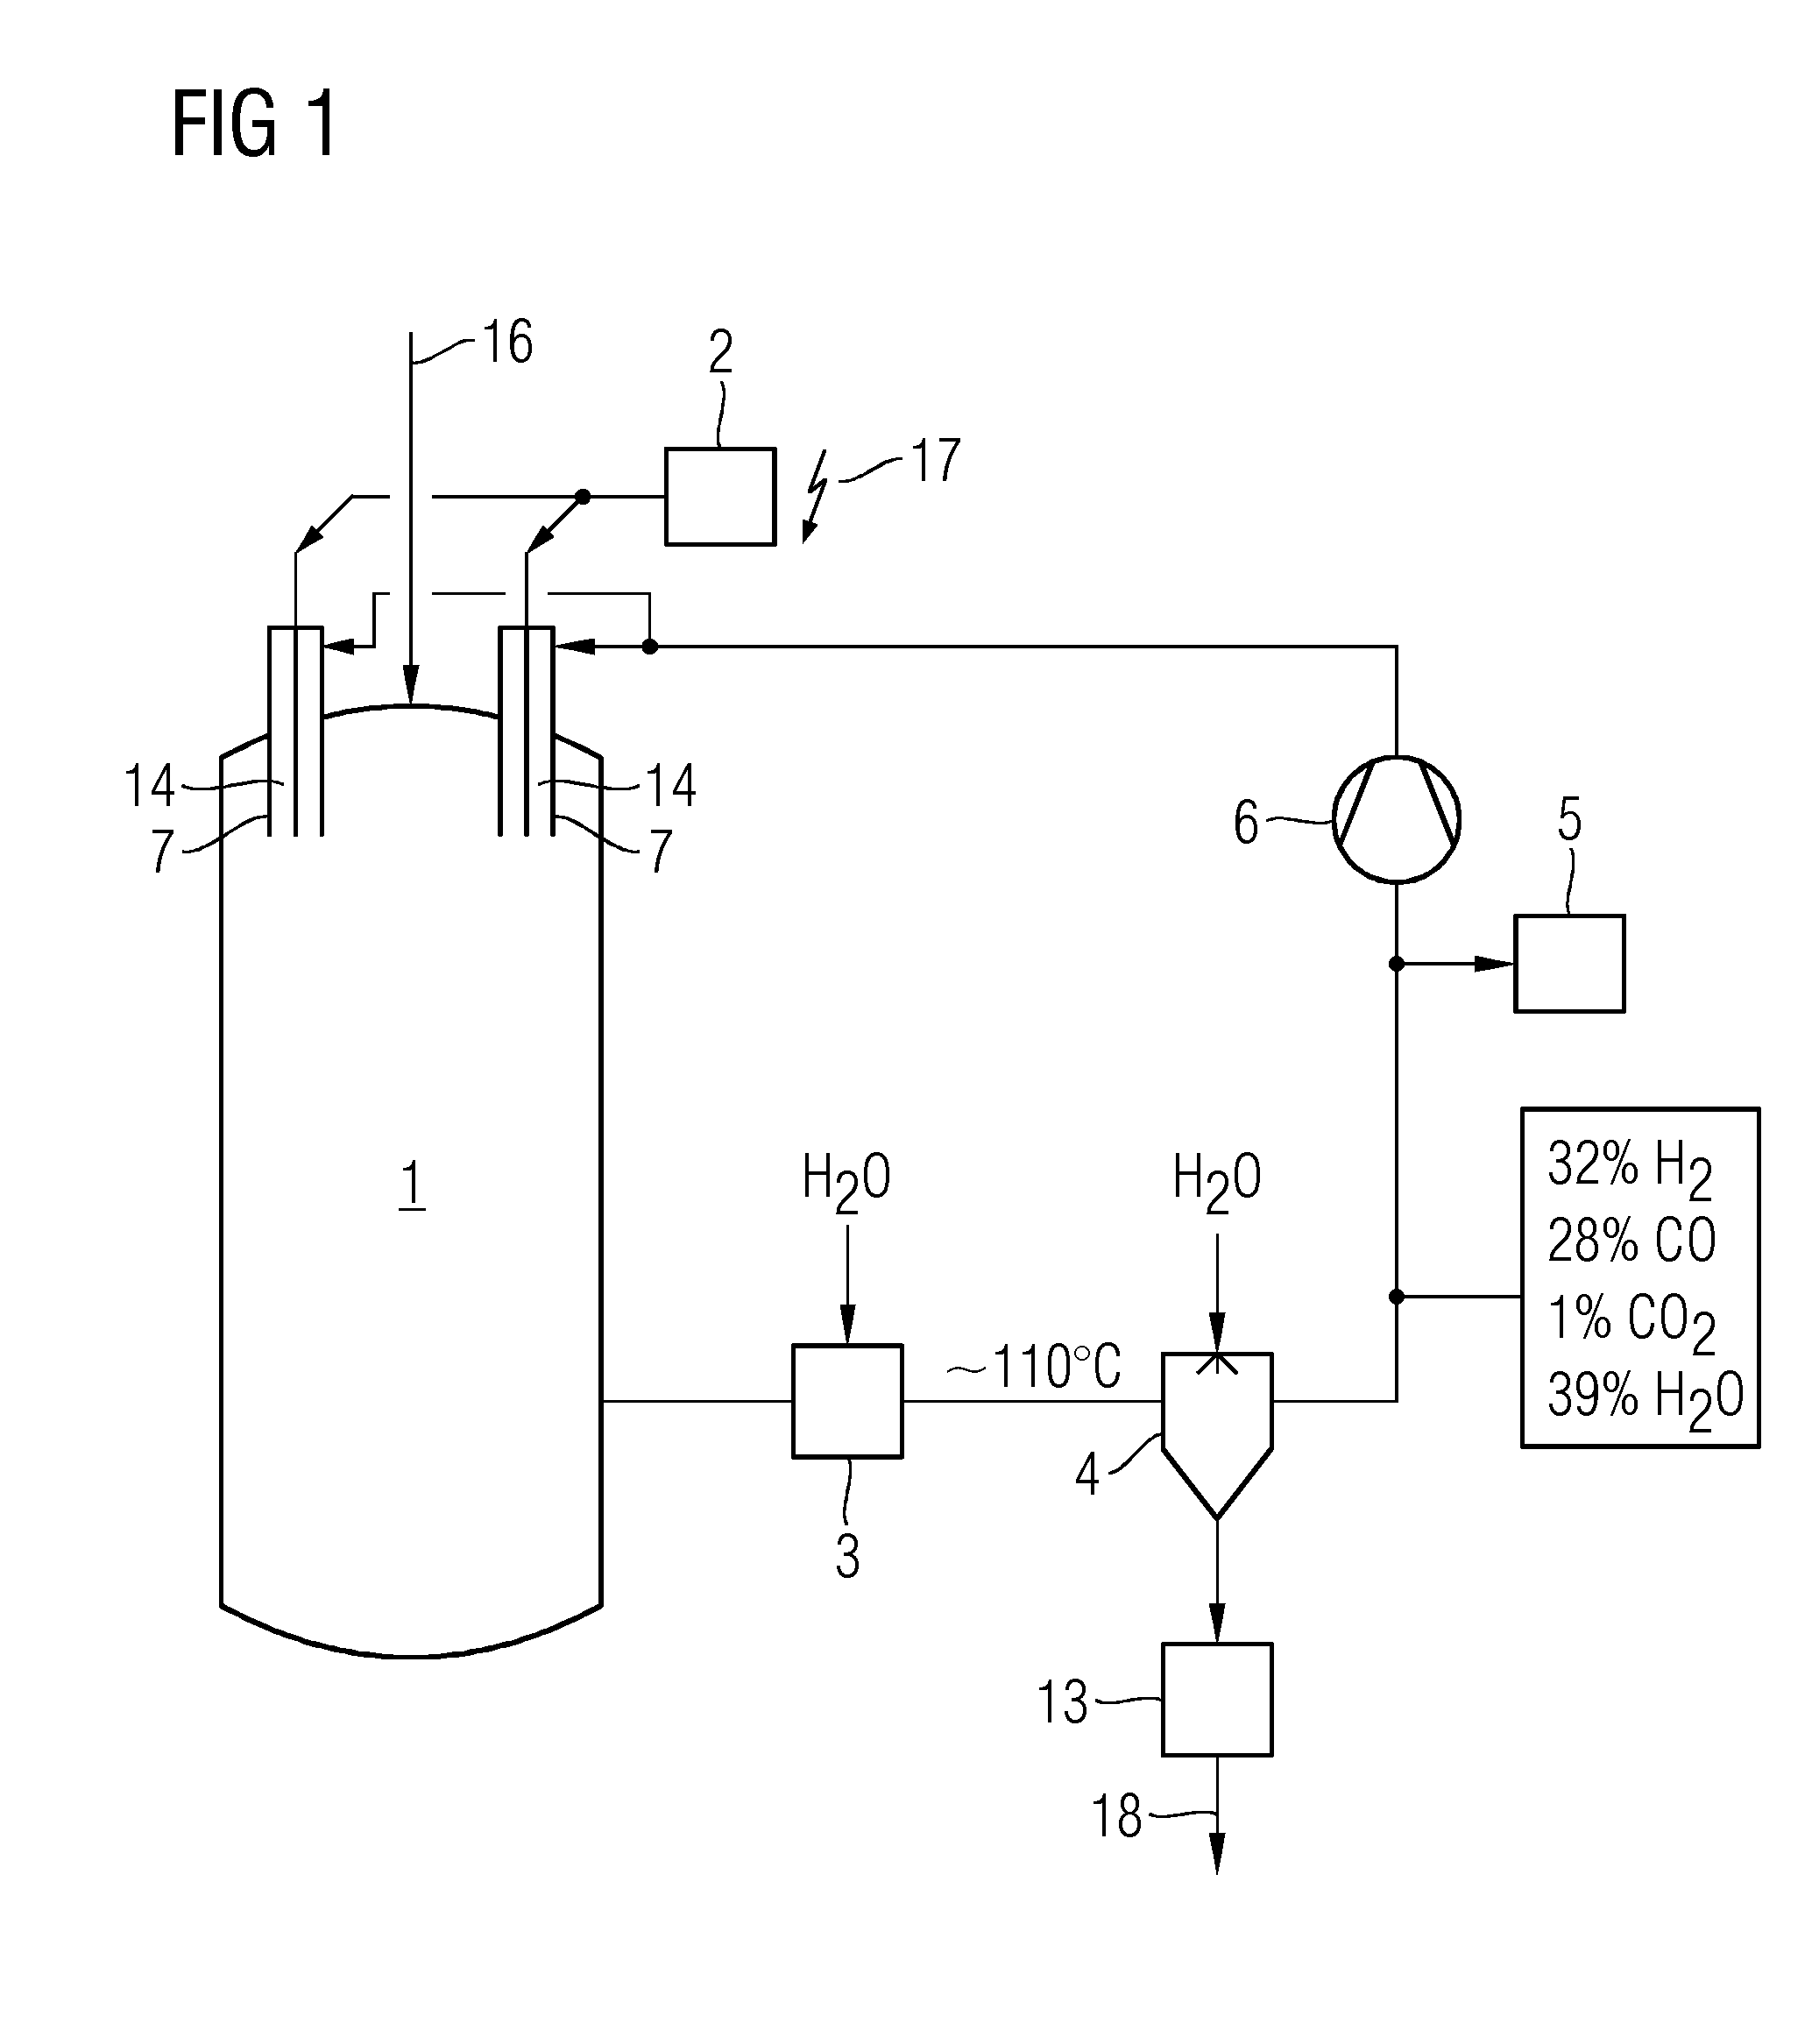 Entrained flow gasifier having an integrated intermediate temperature plasma